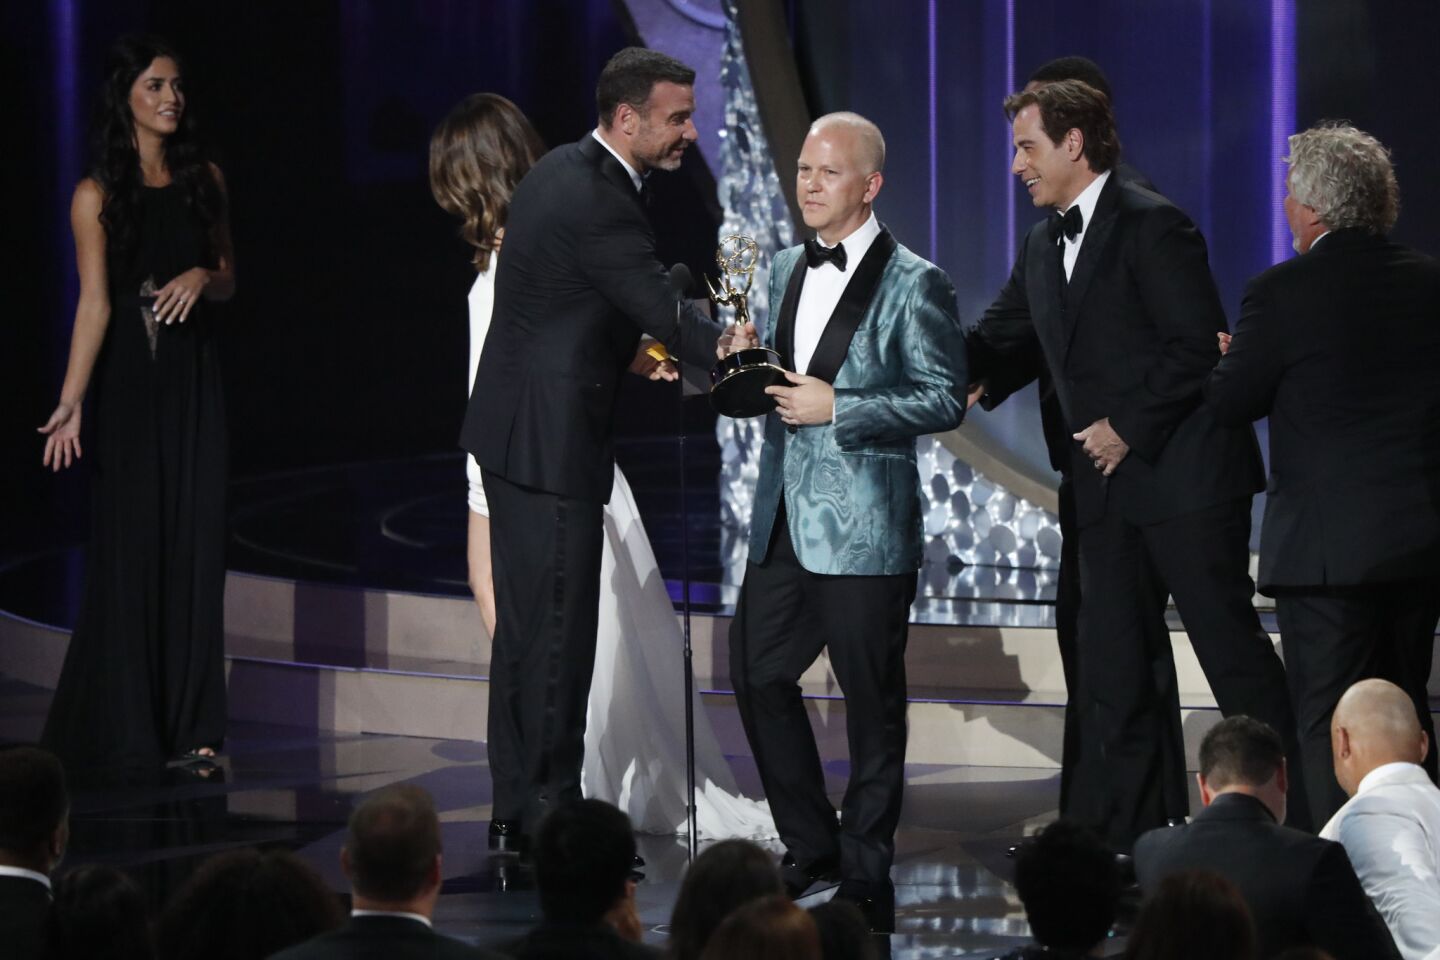 Ryan Murphy, left, and John Travolta accept the award for limited series for "The People v. O.J. Simpson: American Crime Story.